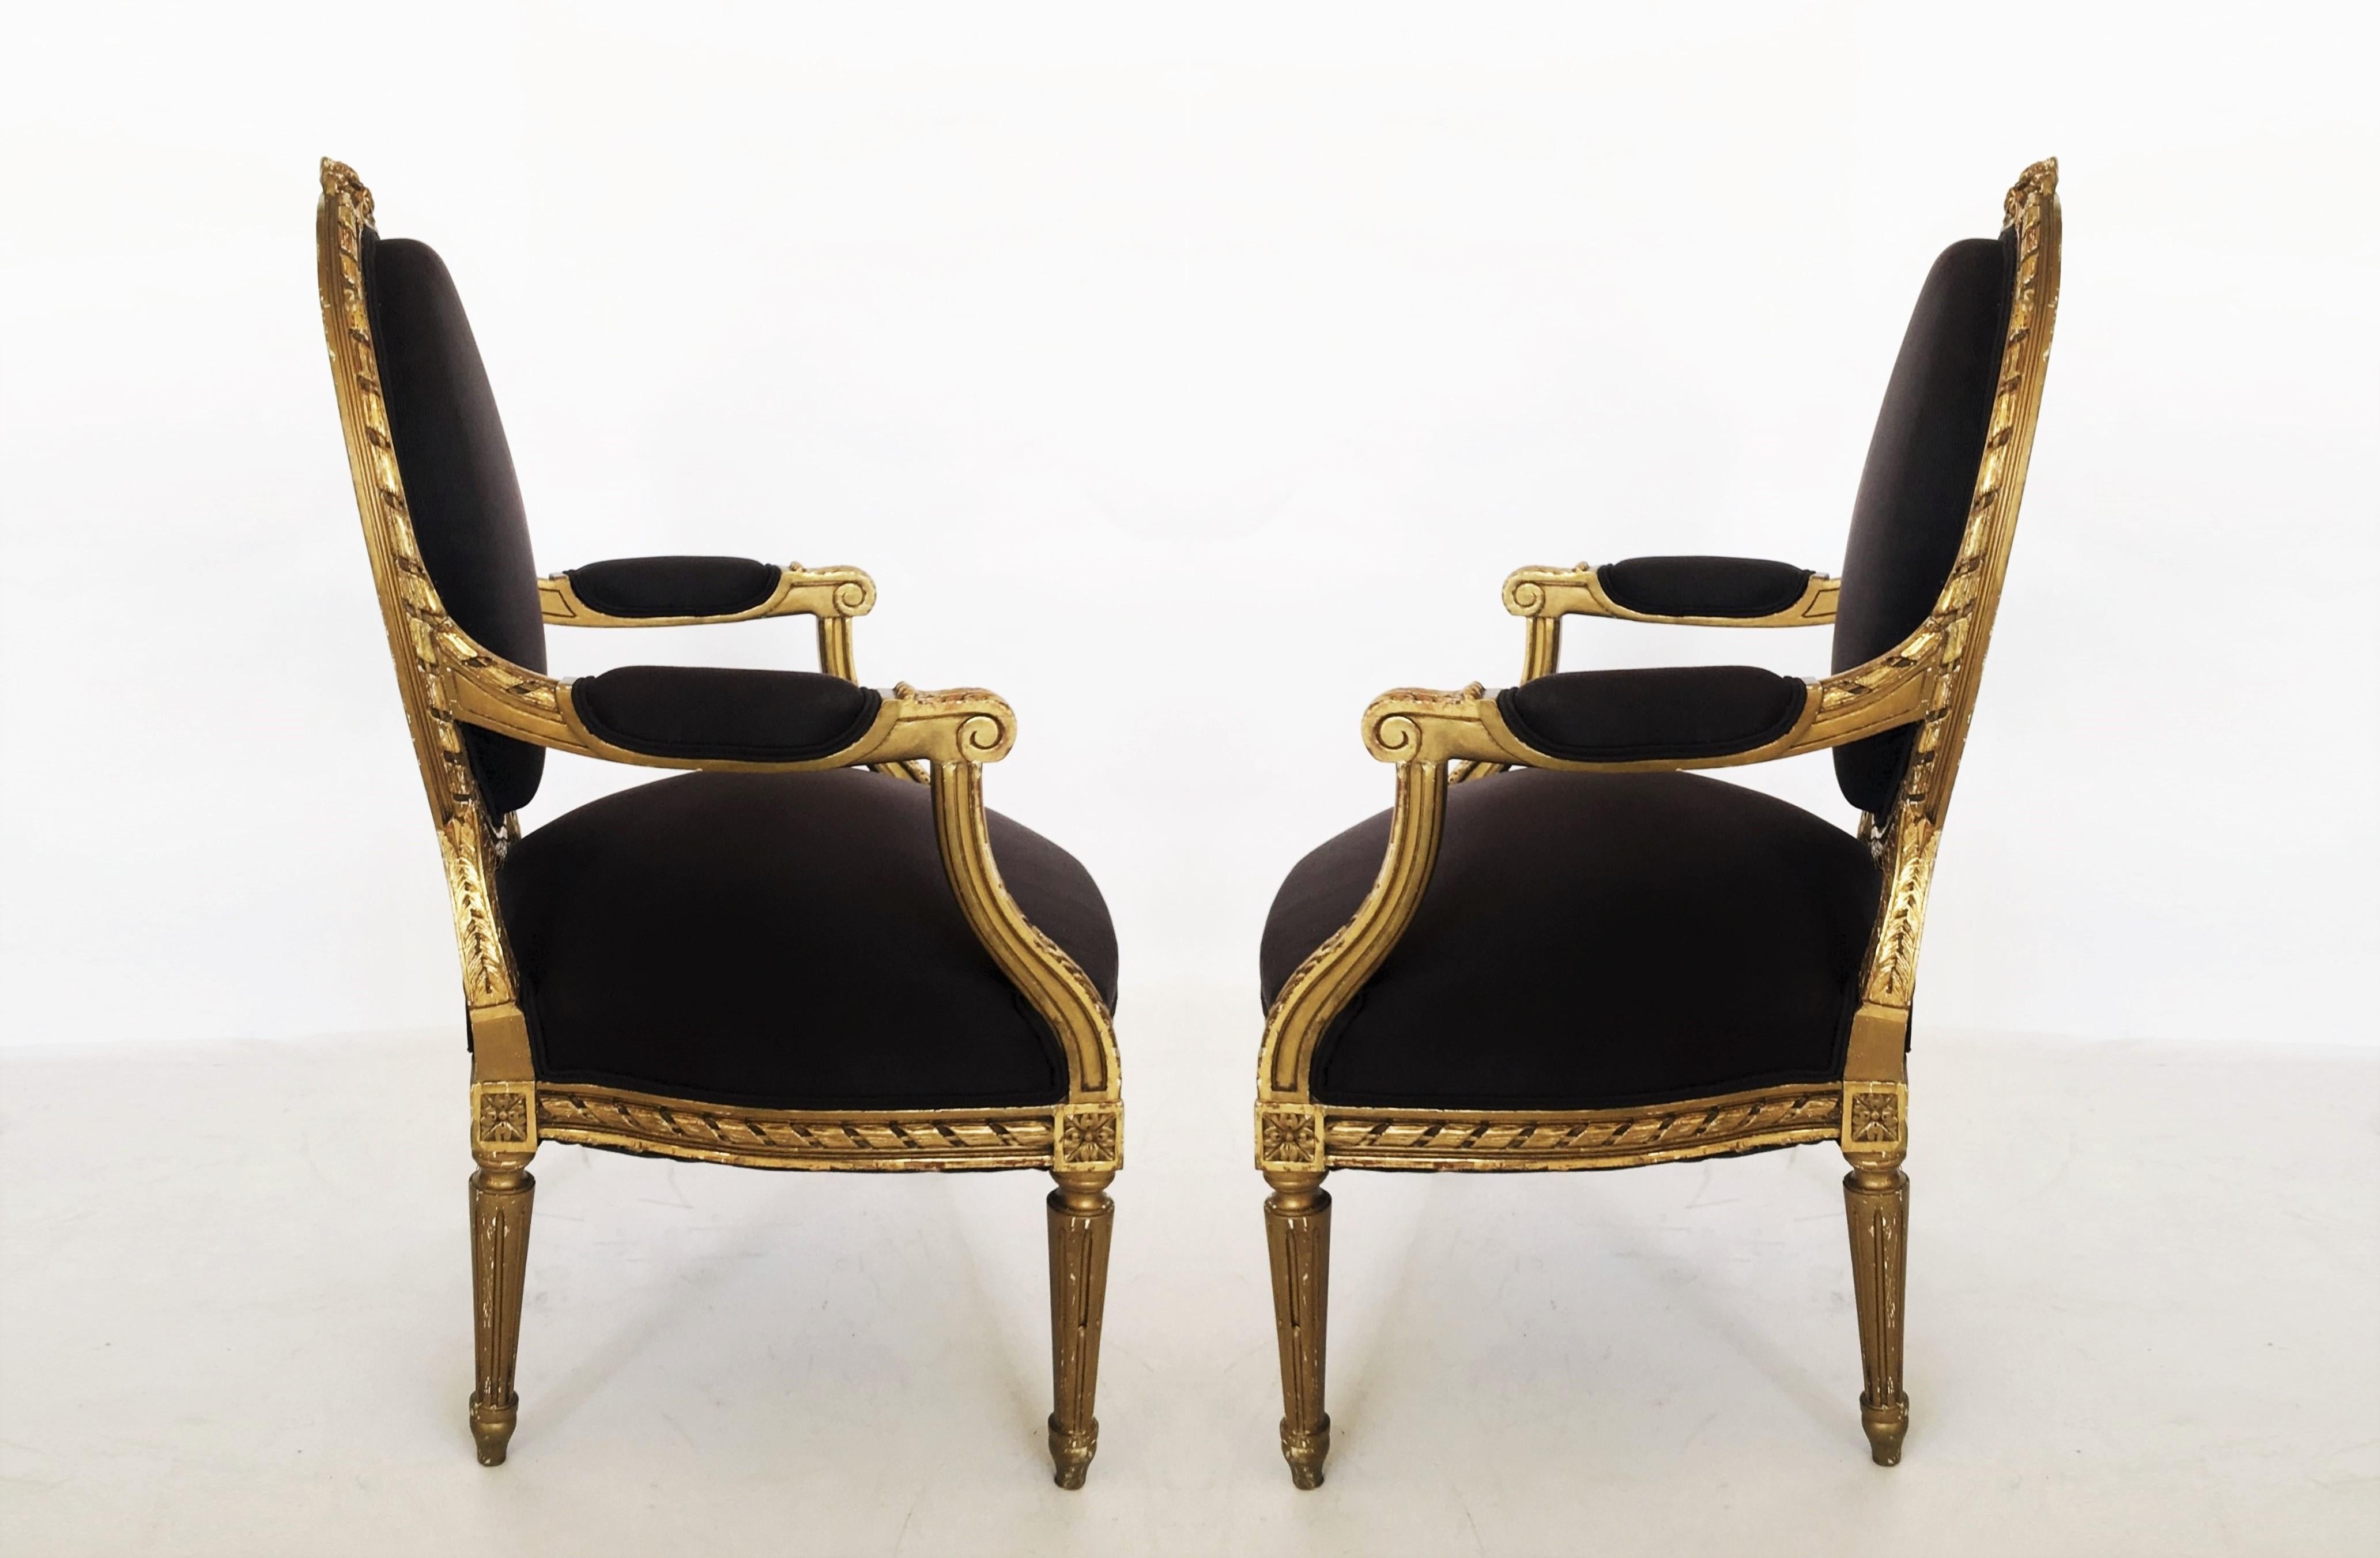 19th Century French Louis XVI Style Giltwood Fauteuils, Pair For Sale 5